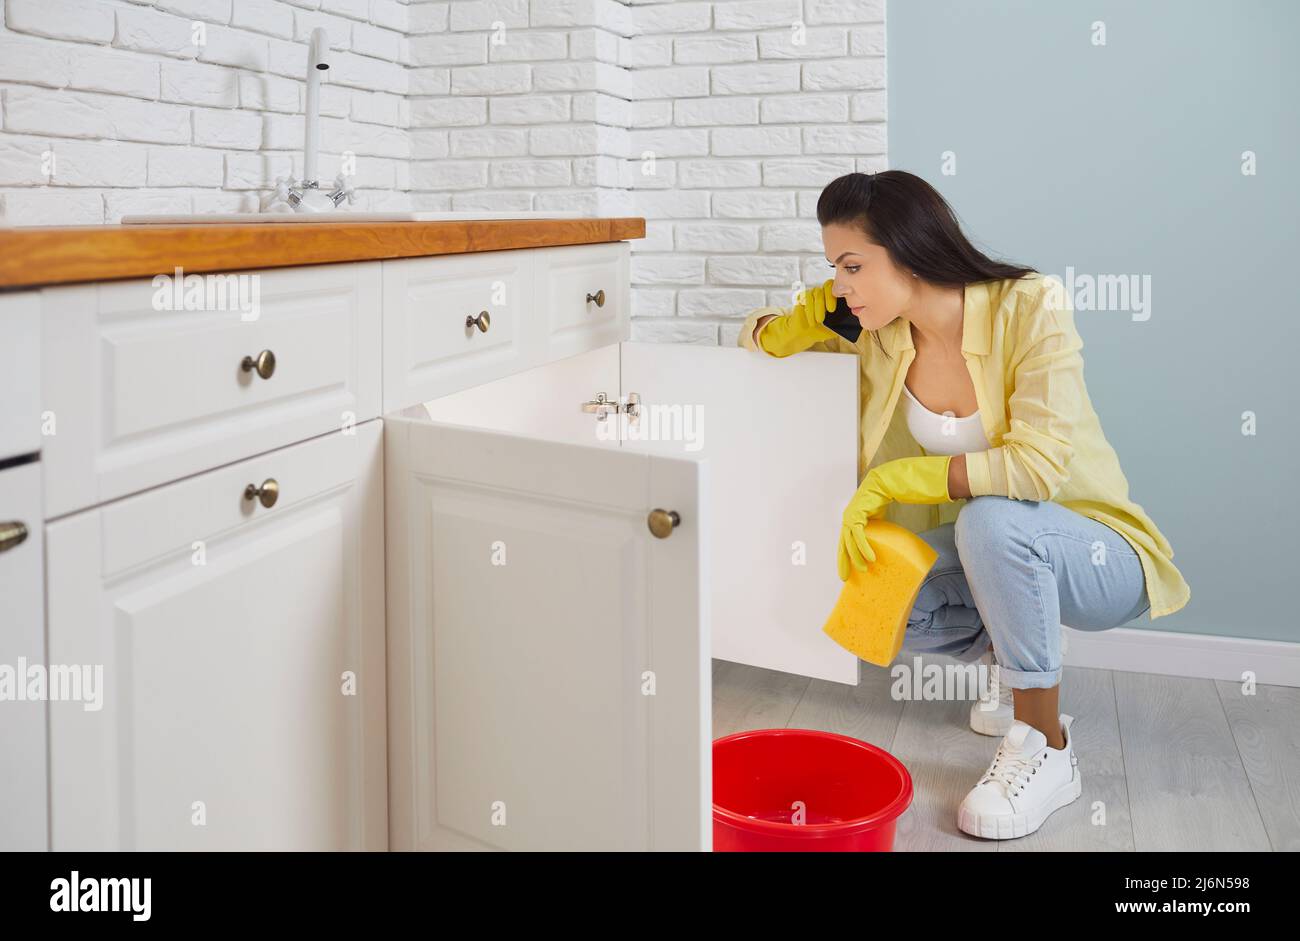 Frustrated woman on phone calls plumber because of leaking pipe in sink in kitchen. Stock Photo